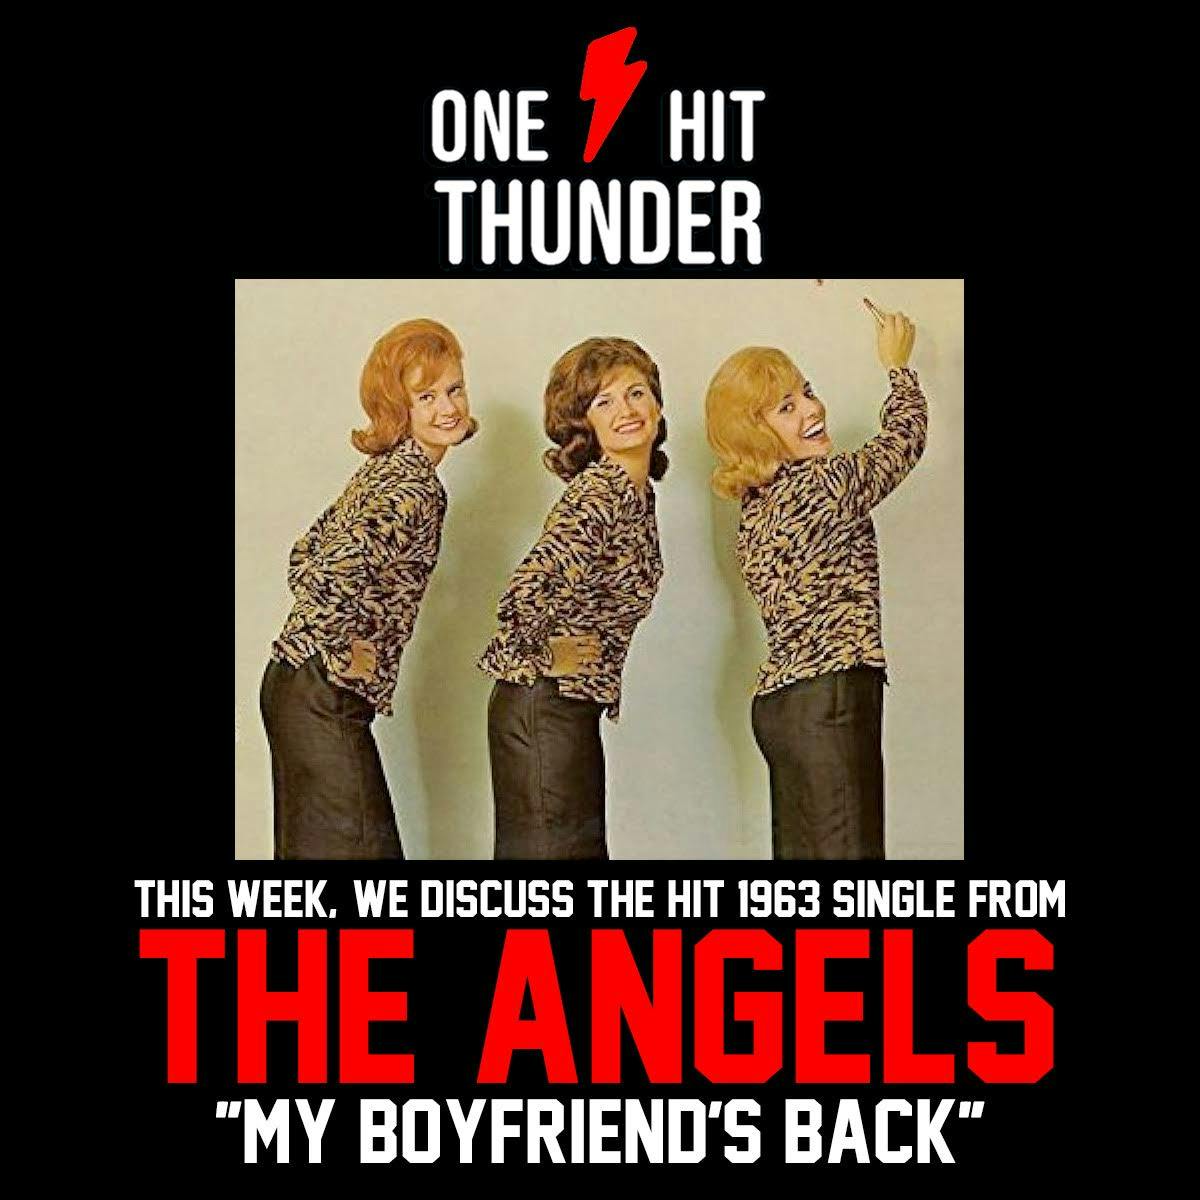 ”My Boyfriend’s Back” by The Angels